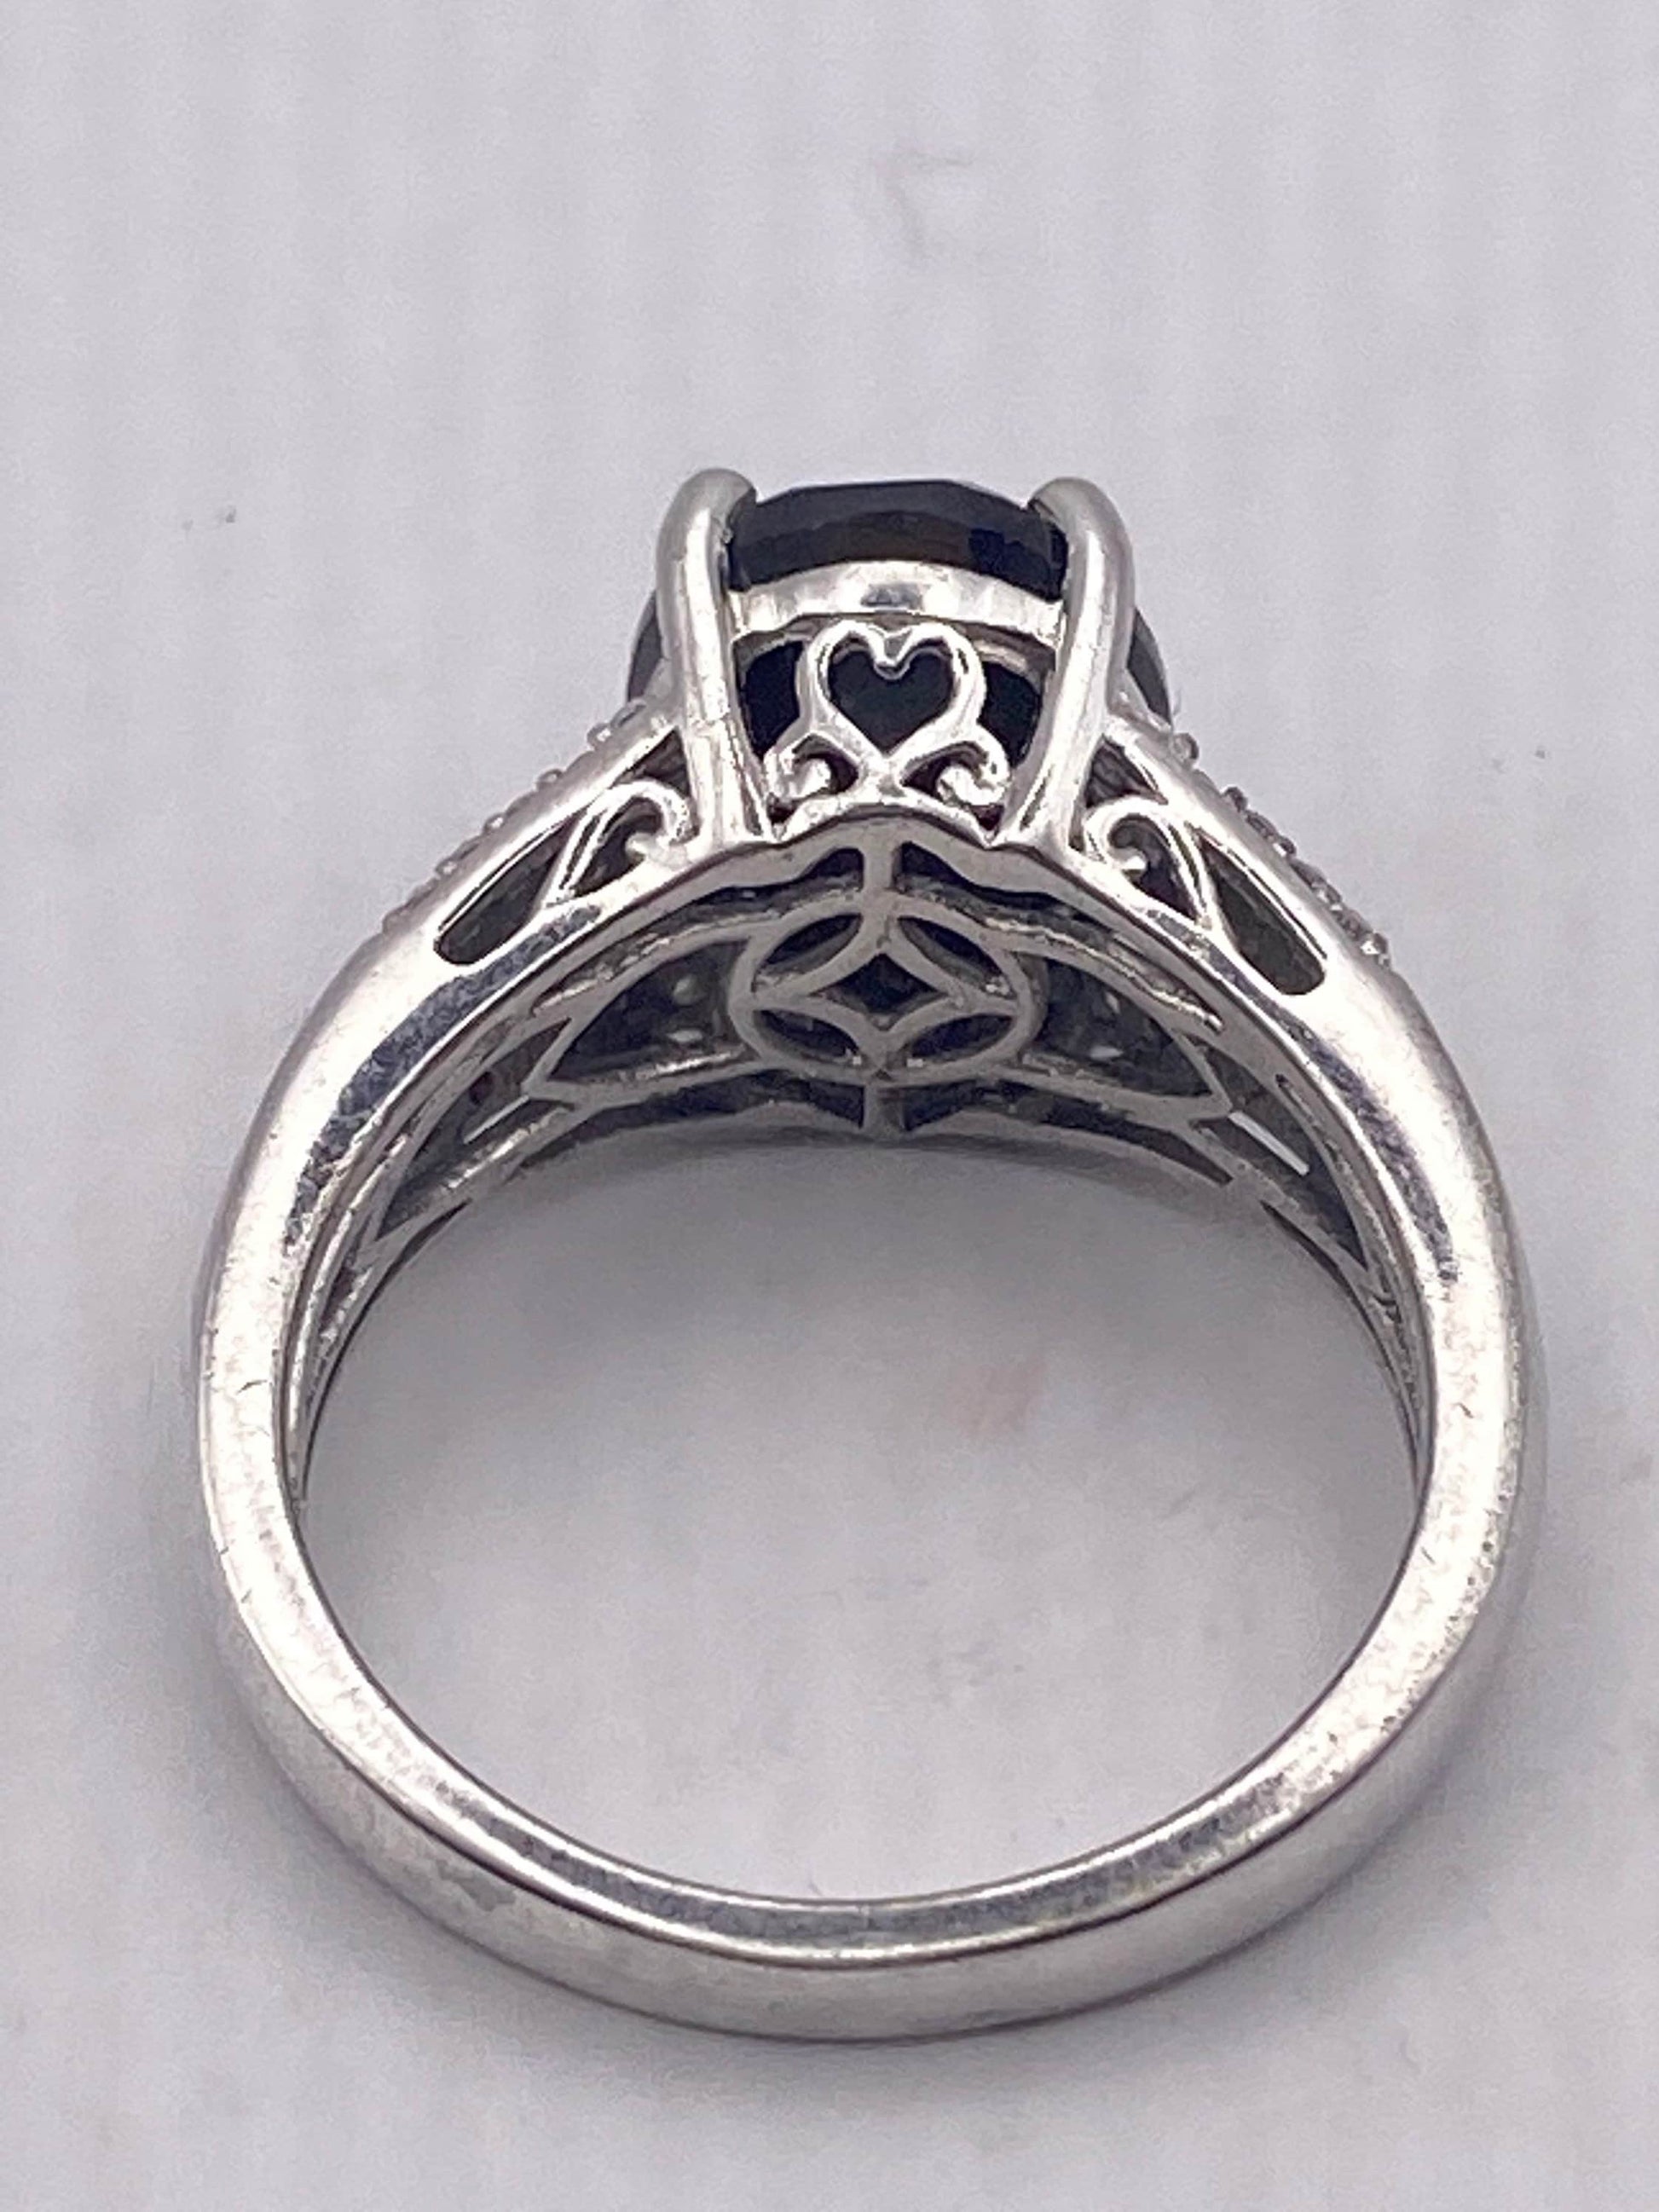 Vintage Black Rainbow Obsidian 925 Sterling Silver Gothic Ring